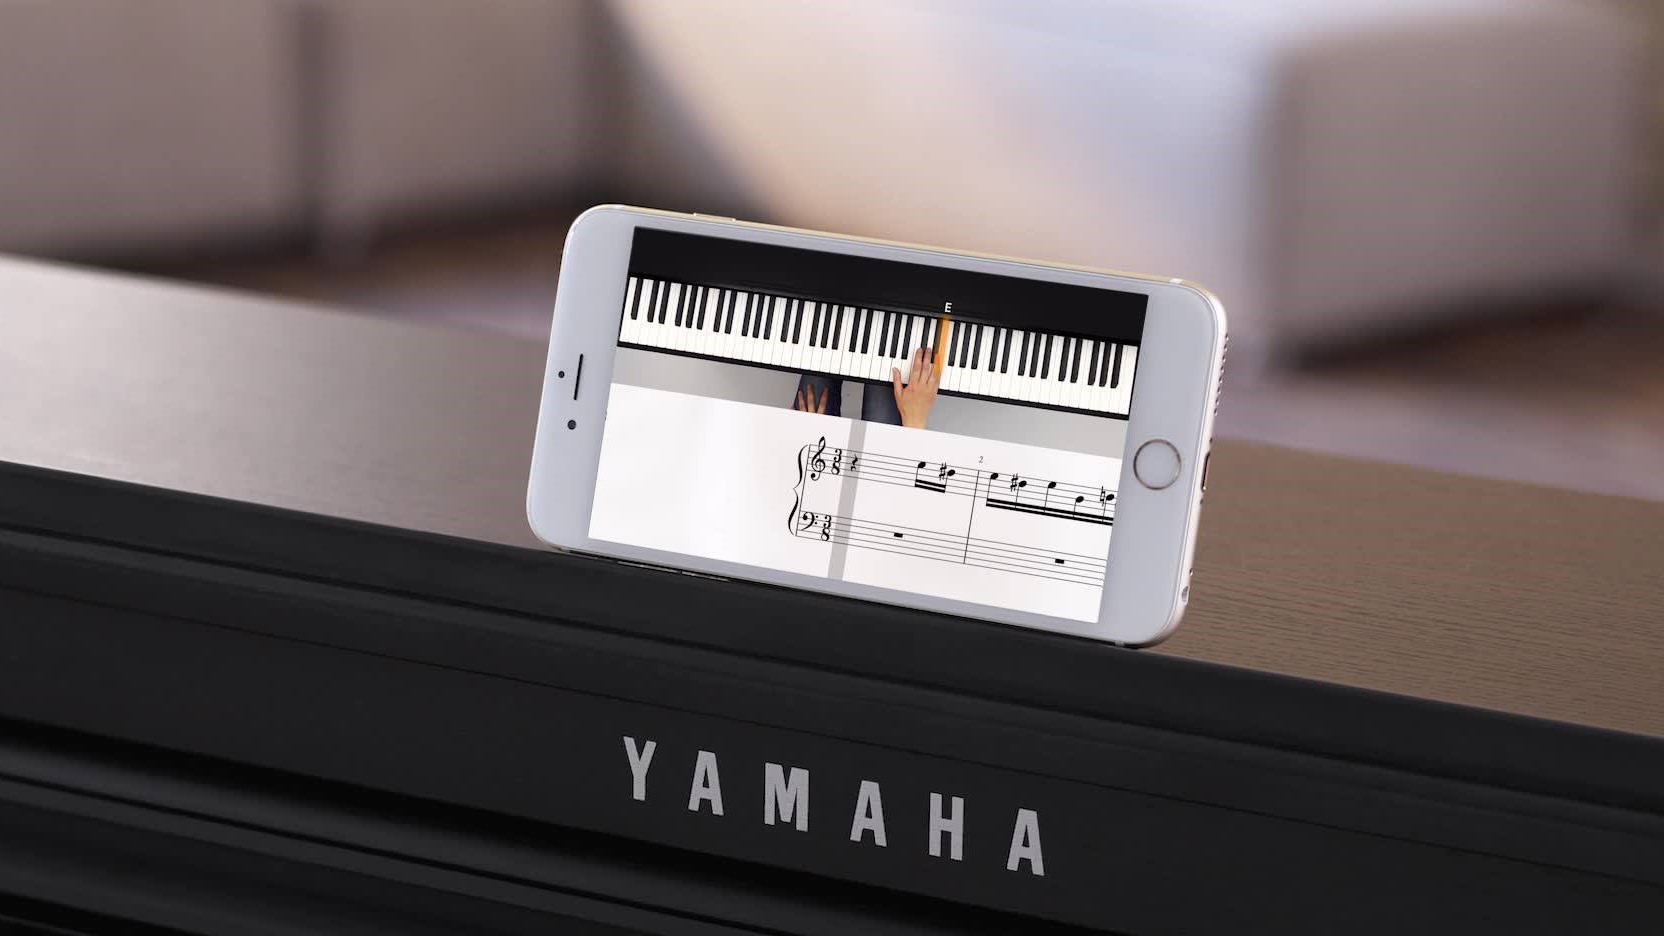 Stream No Ads, No Problems - Real Piano APK for Android Devices